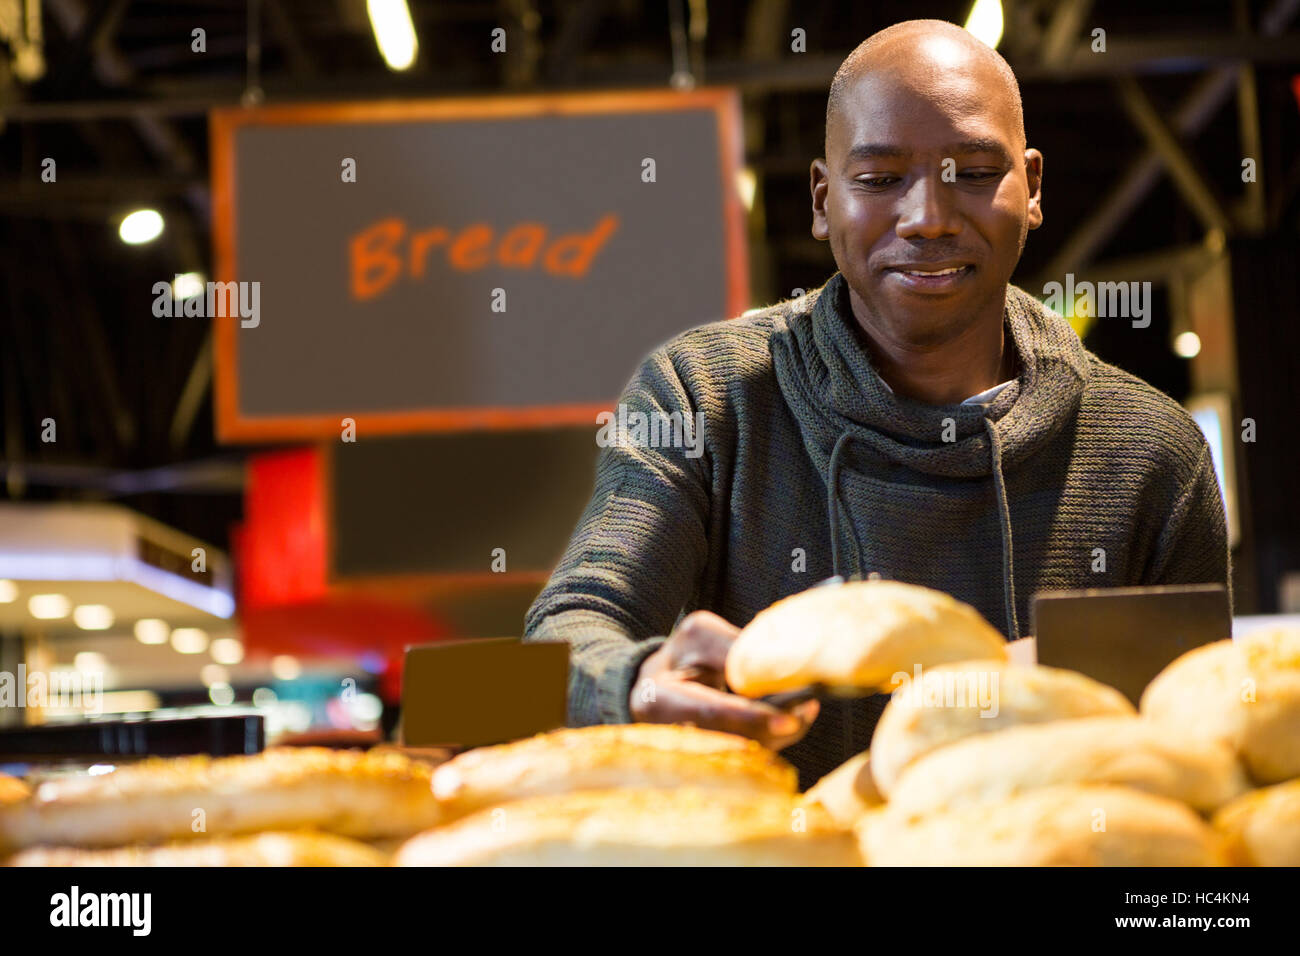 Man buying croissant bread from display counter Stock Photo